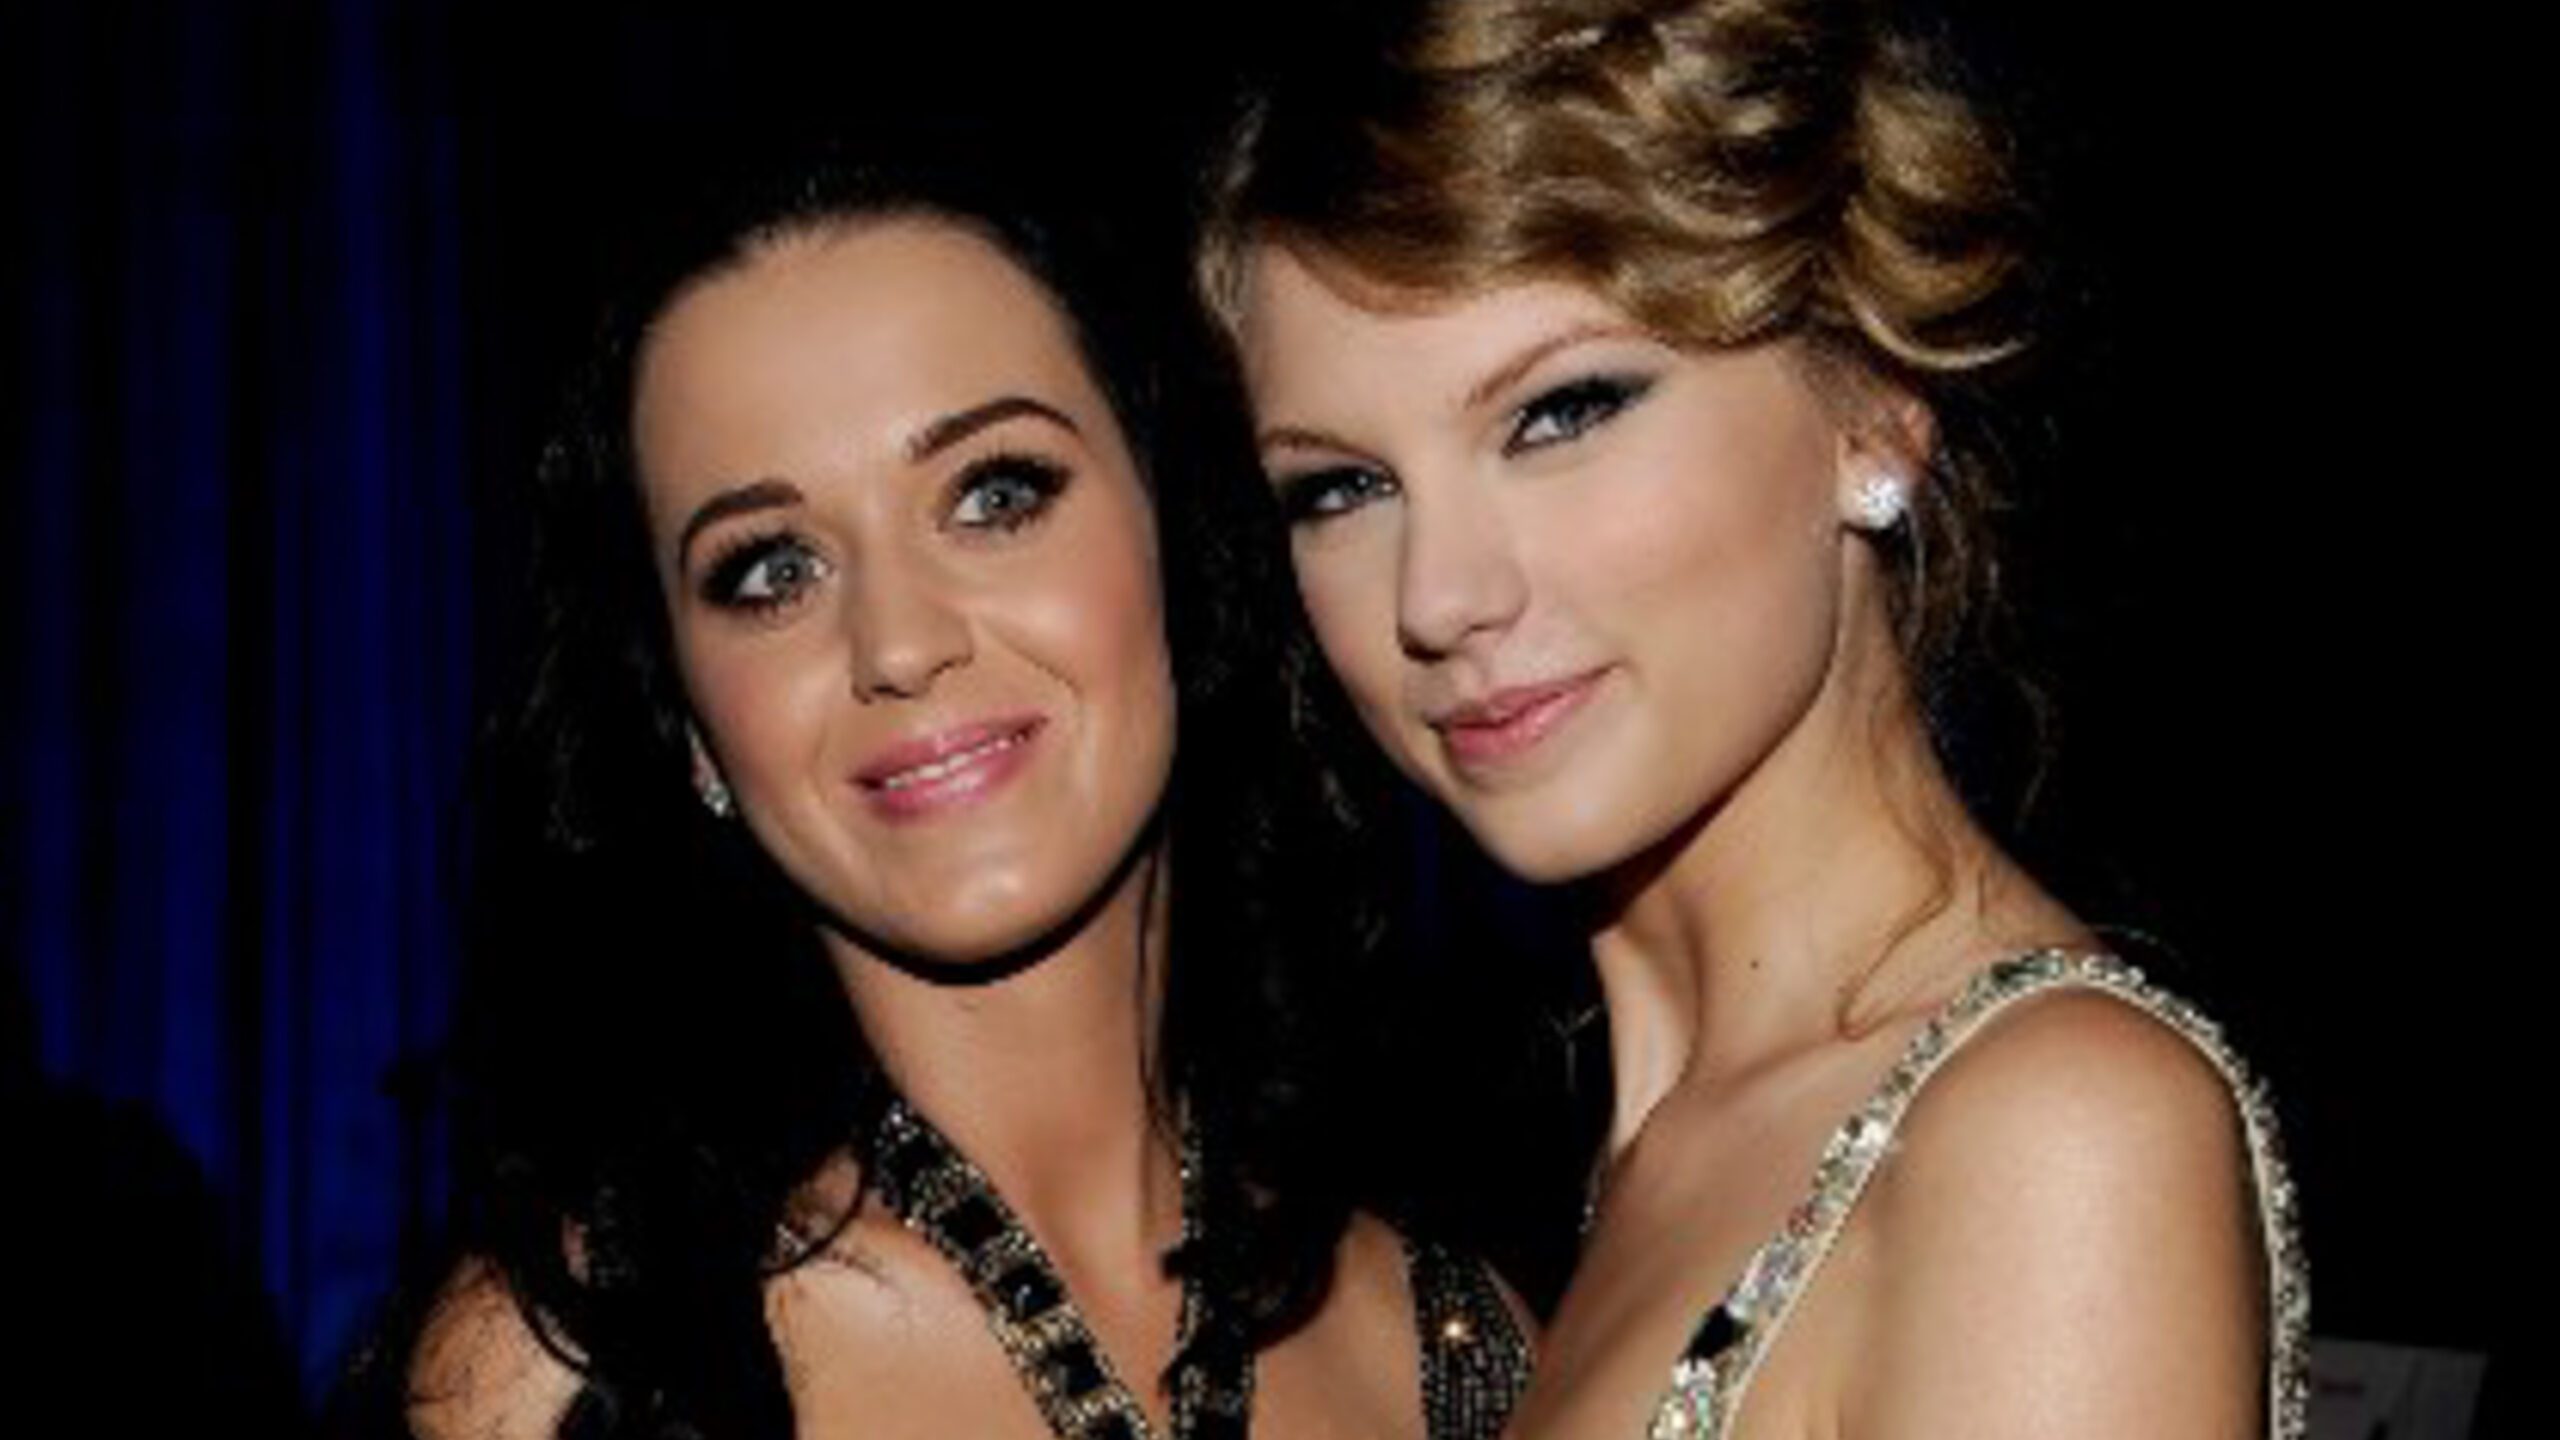 Will Katy Perry respond to Taylor Swift’s ‘Bad Blood?’